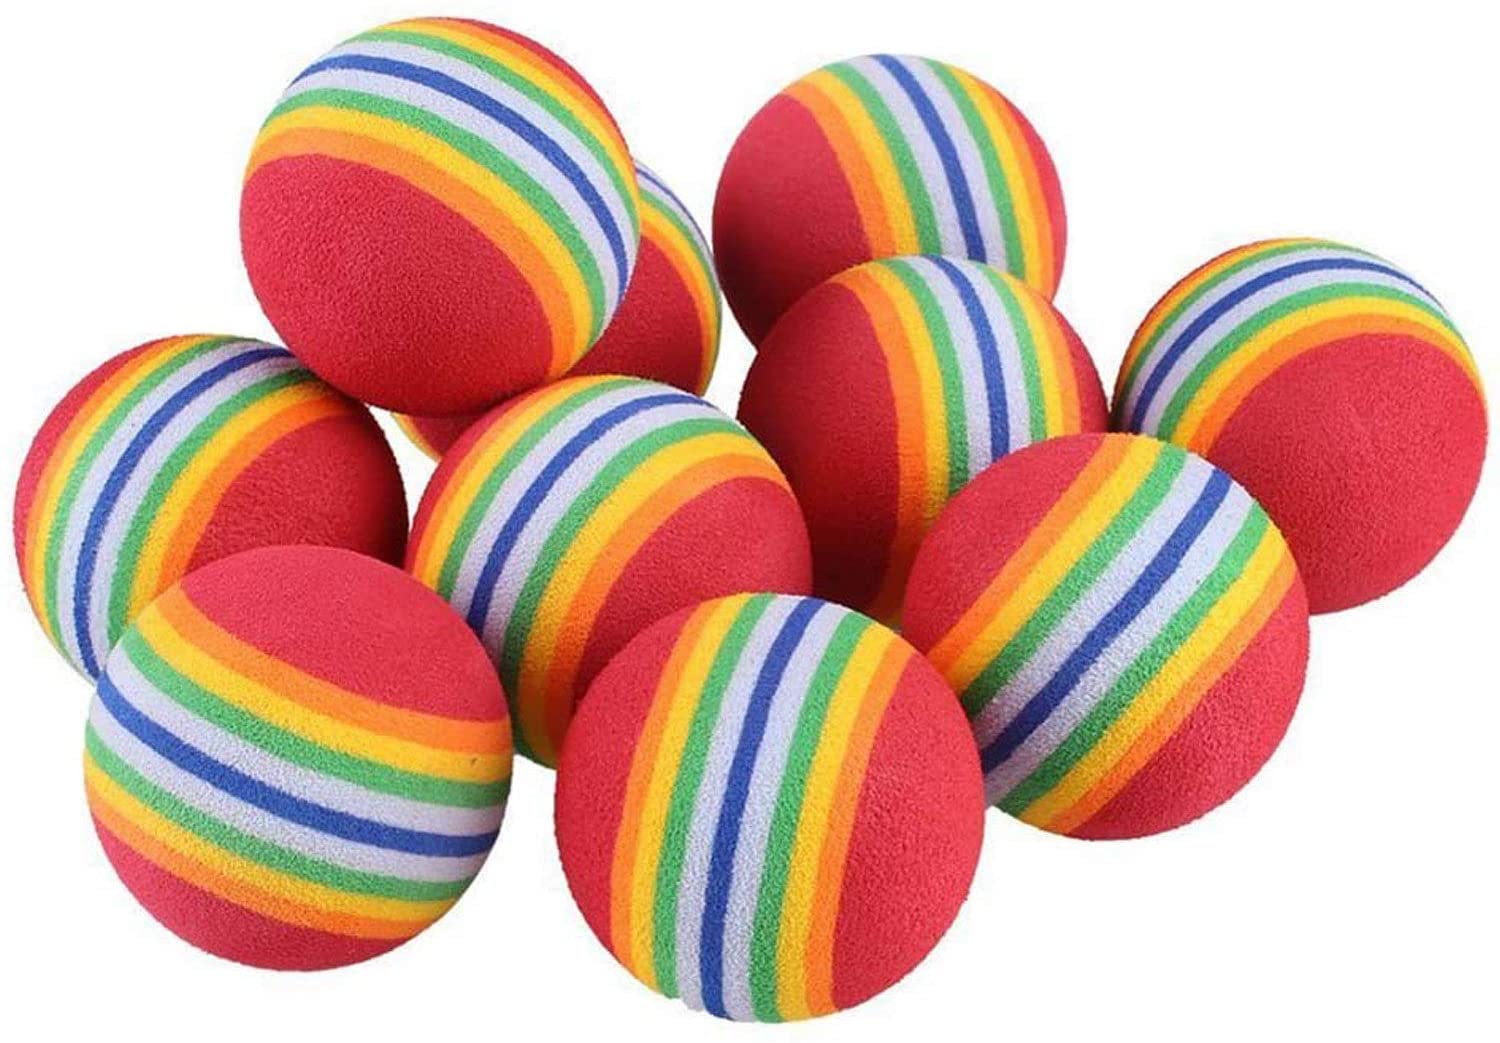 KUTKUT Pack of 10 Foam Balls for Cats, Colorful Rainbow Ball Cat Toy Sponge Ball Cat Toy Ball, Soft Pet Ball Toy for Cat Puppy Kitty Indoor Activity Play Training - kutkutstyle